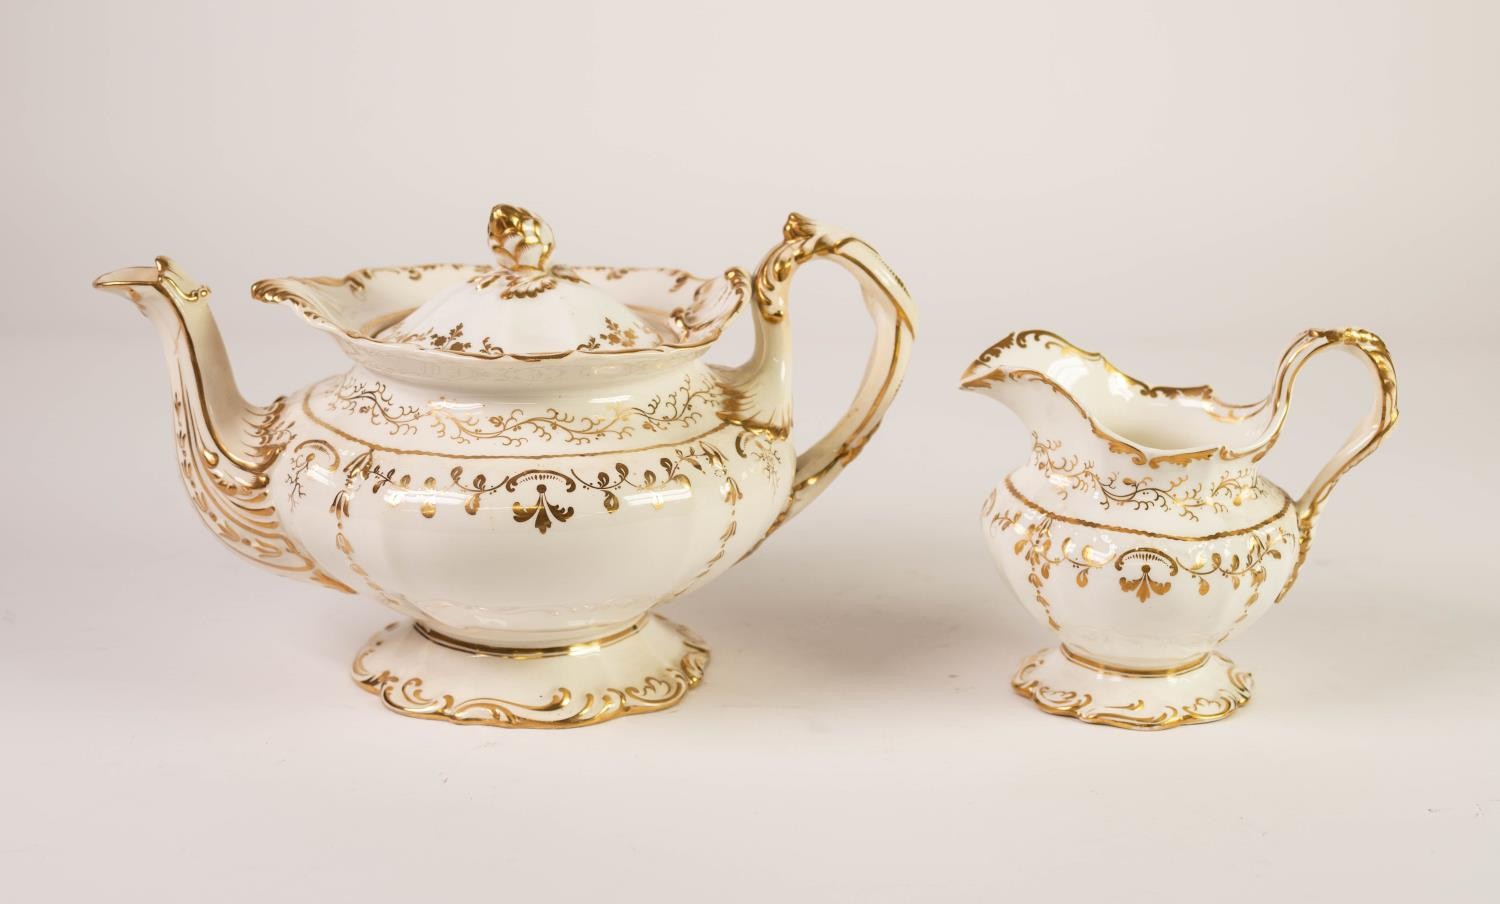 VICTORIAN STAFFORDSHIRE PORCELAIN ROCOCO REVIVAL TEAPOT AND MATCHING CREAM JUG, scroll moulded and